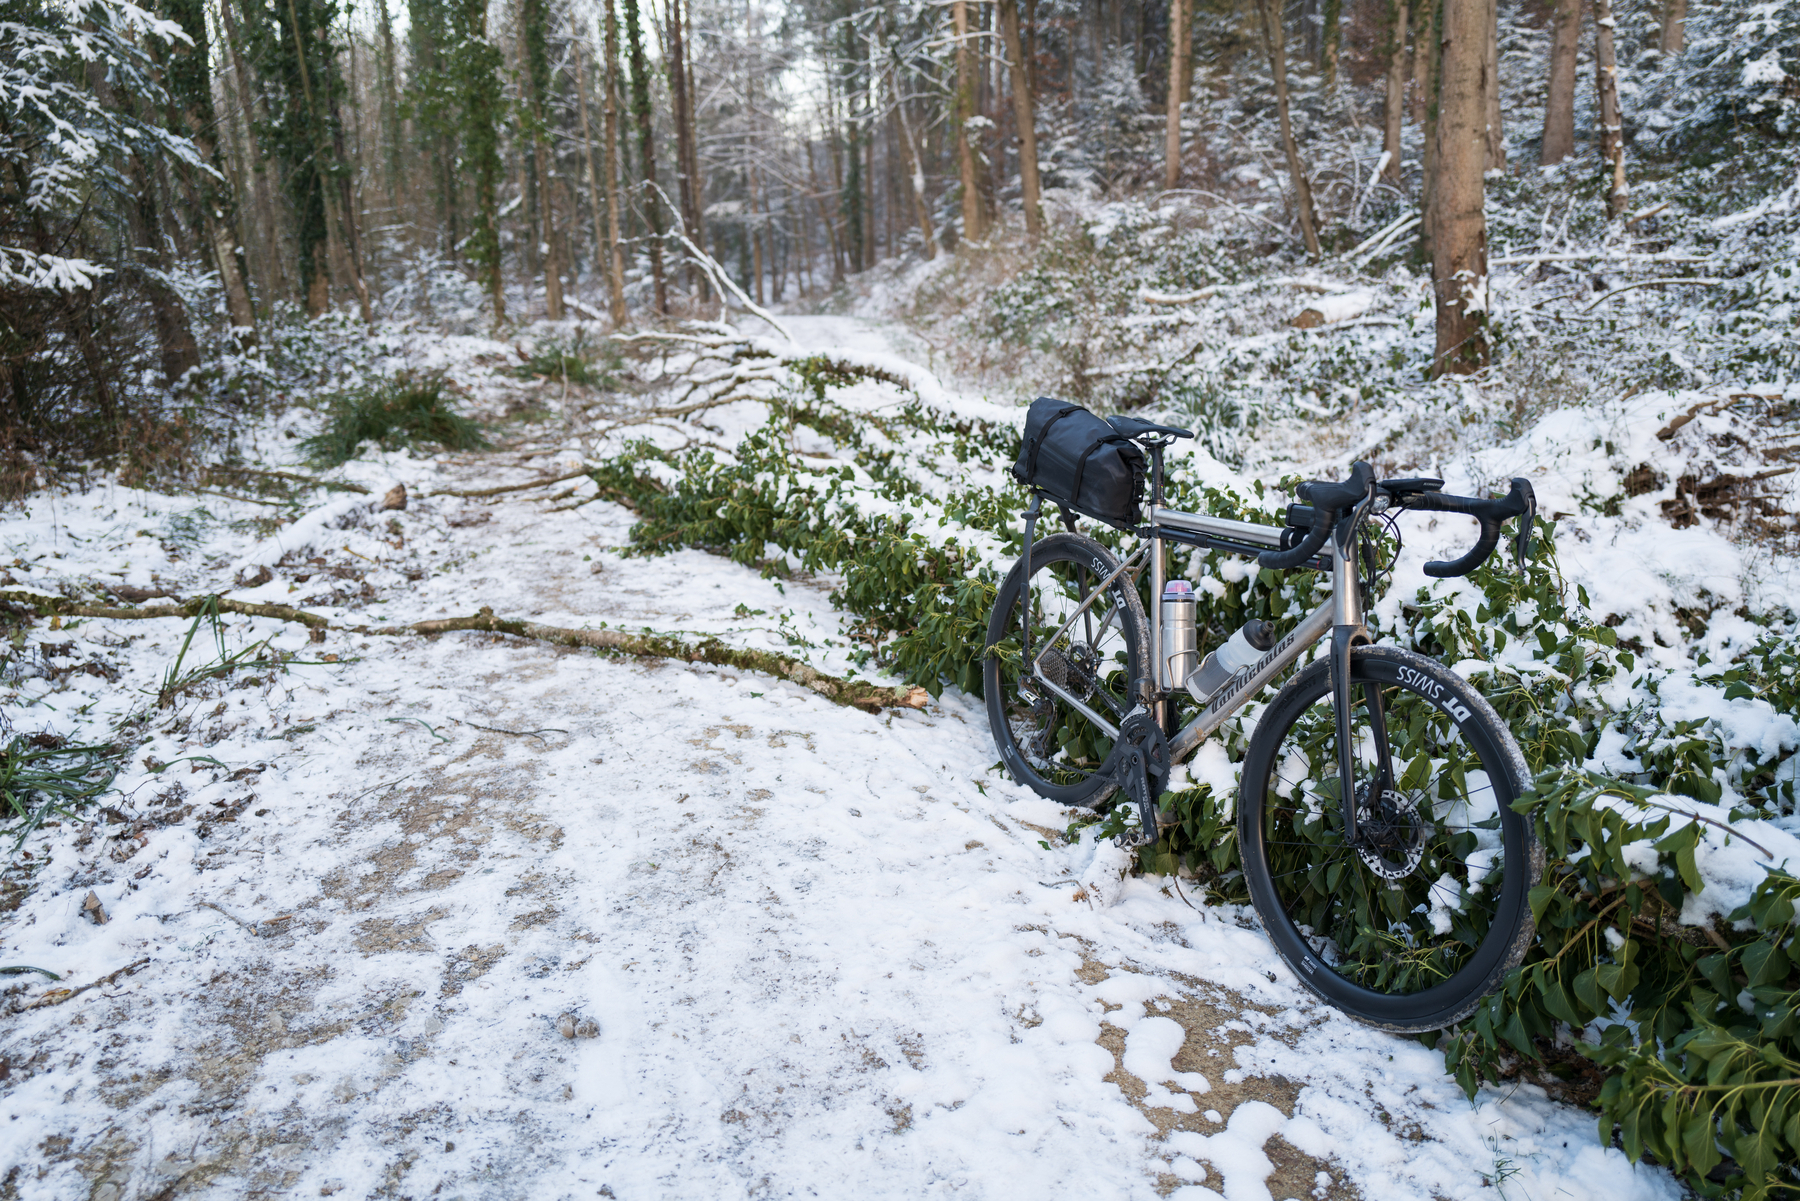 Titanium all-road bike with a black rear rack bag attached leaning against a tree that has fallen over and is blocking a forest path. The tree is overgrown with ivy. The forest is covered in snow. 